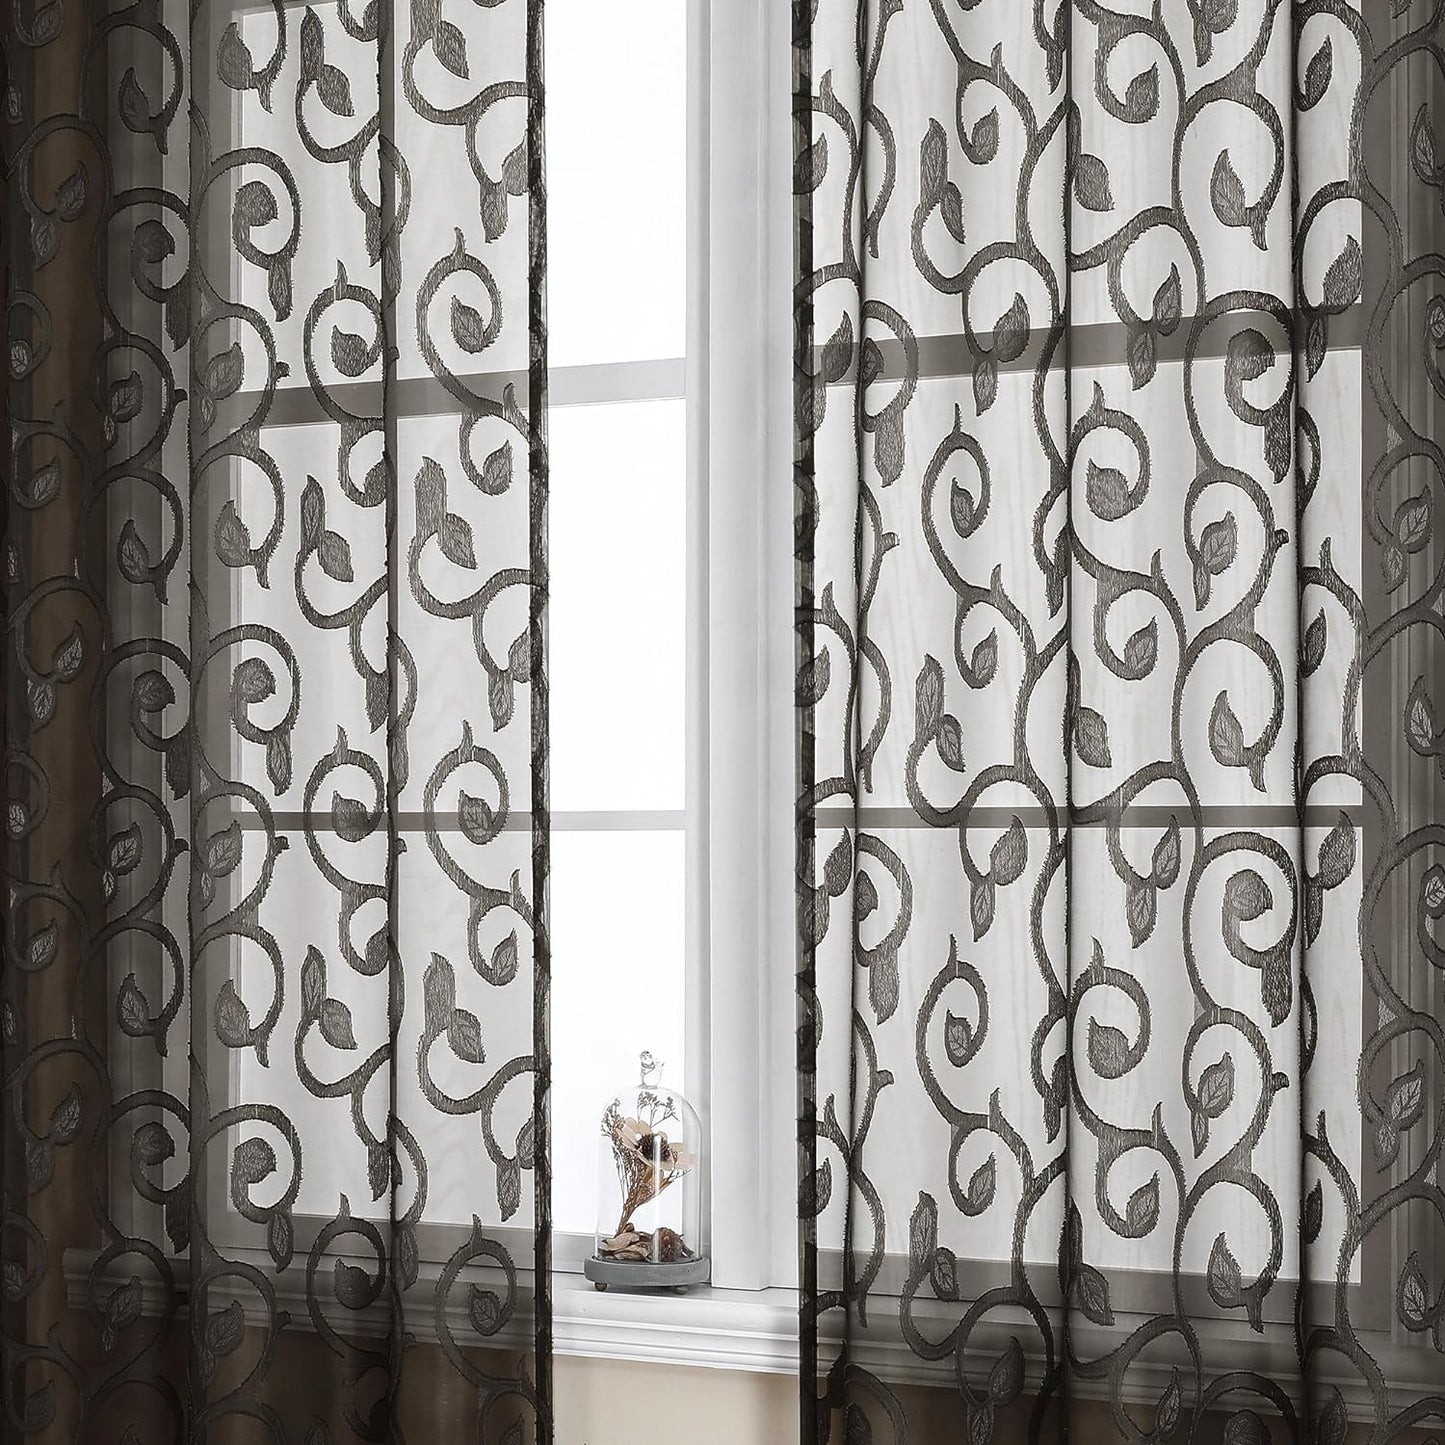 OWENIE Furman Sheer Curtains 84 Inches Long for Bedroom Living Room 2 Panels Set, Light Filtering Window Curtains, Semi Transparent Voile Top Dual Rod Pocket, Grey, 40Wx84L Inch, Total 84 Inches Width  OWENIE Chocolate 40W X 72L 